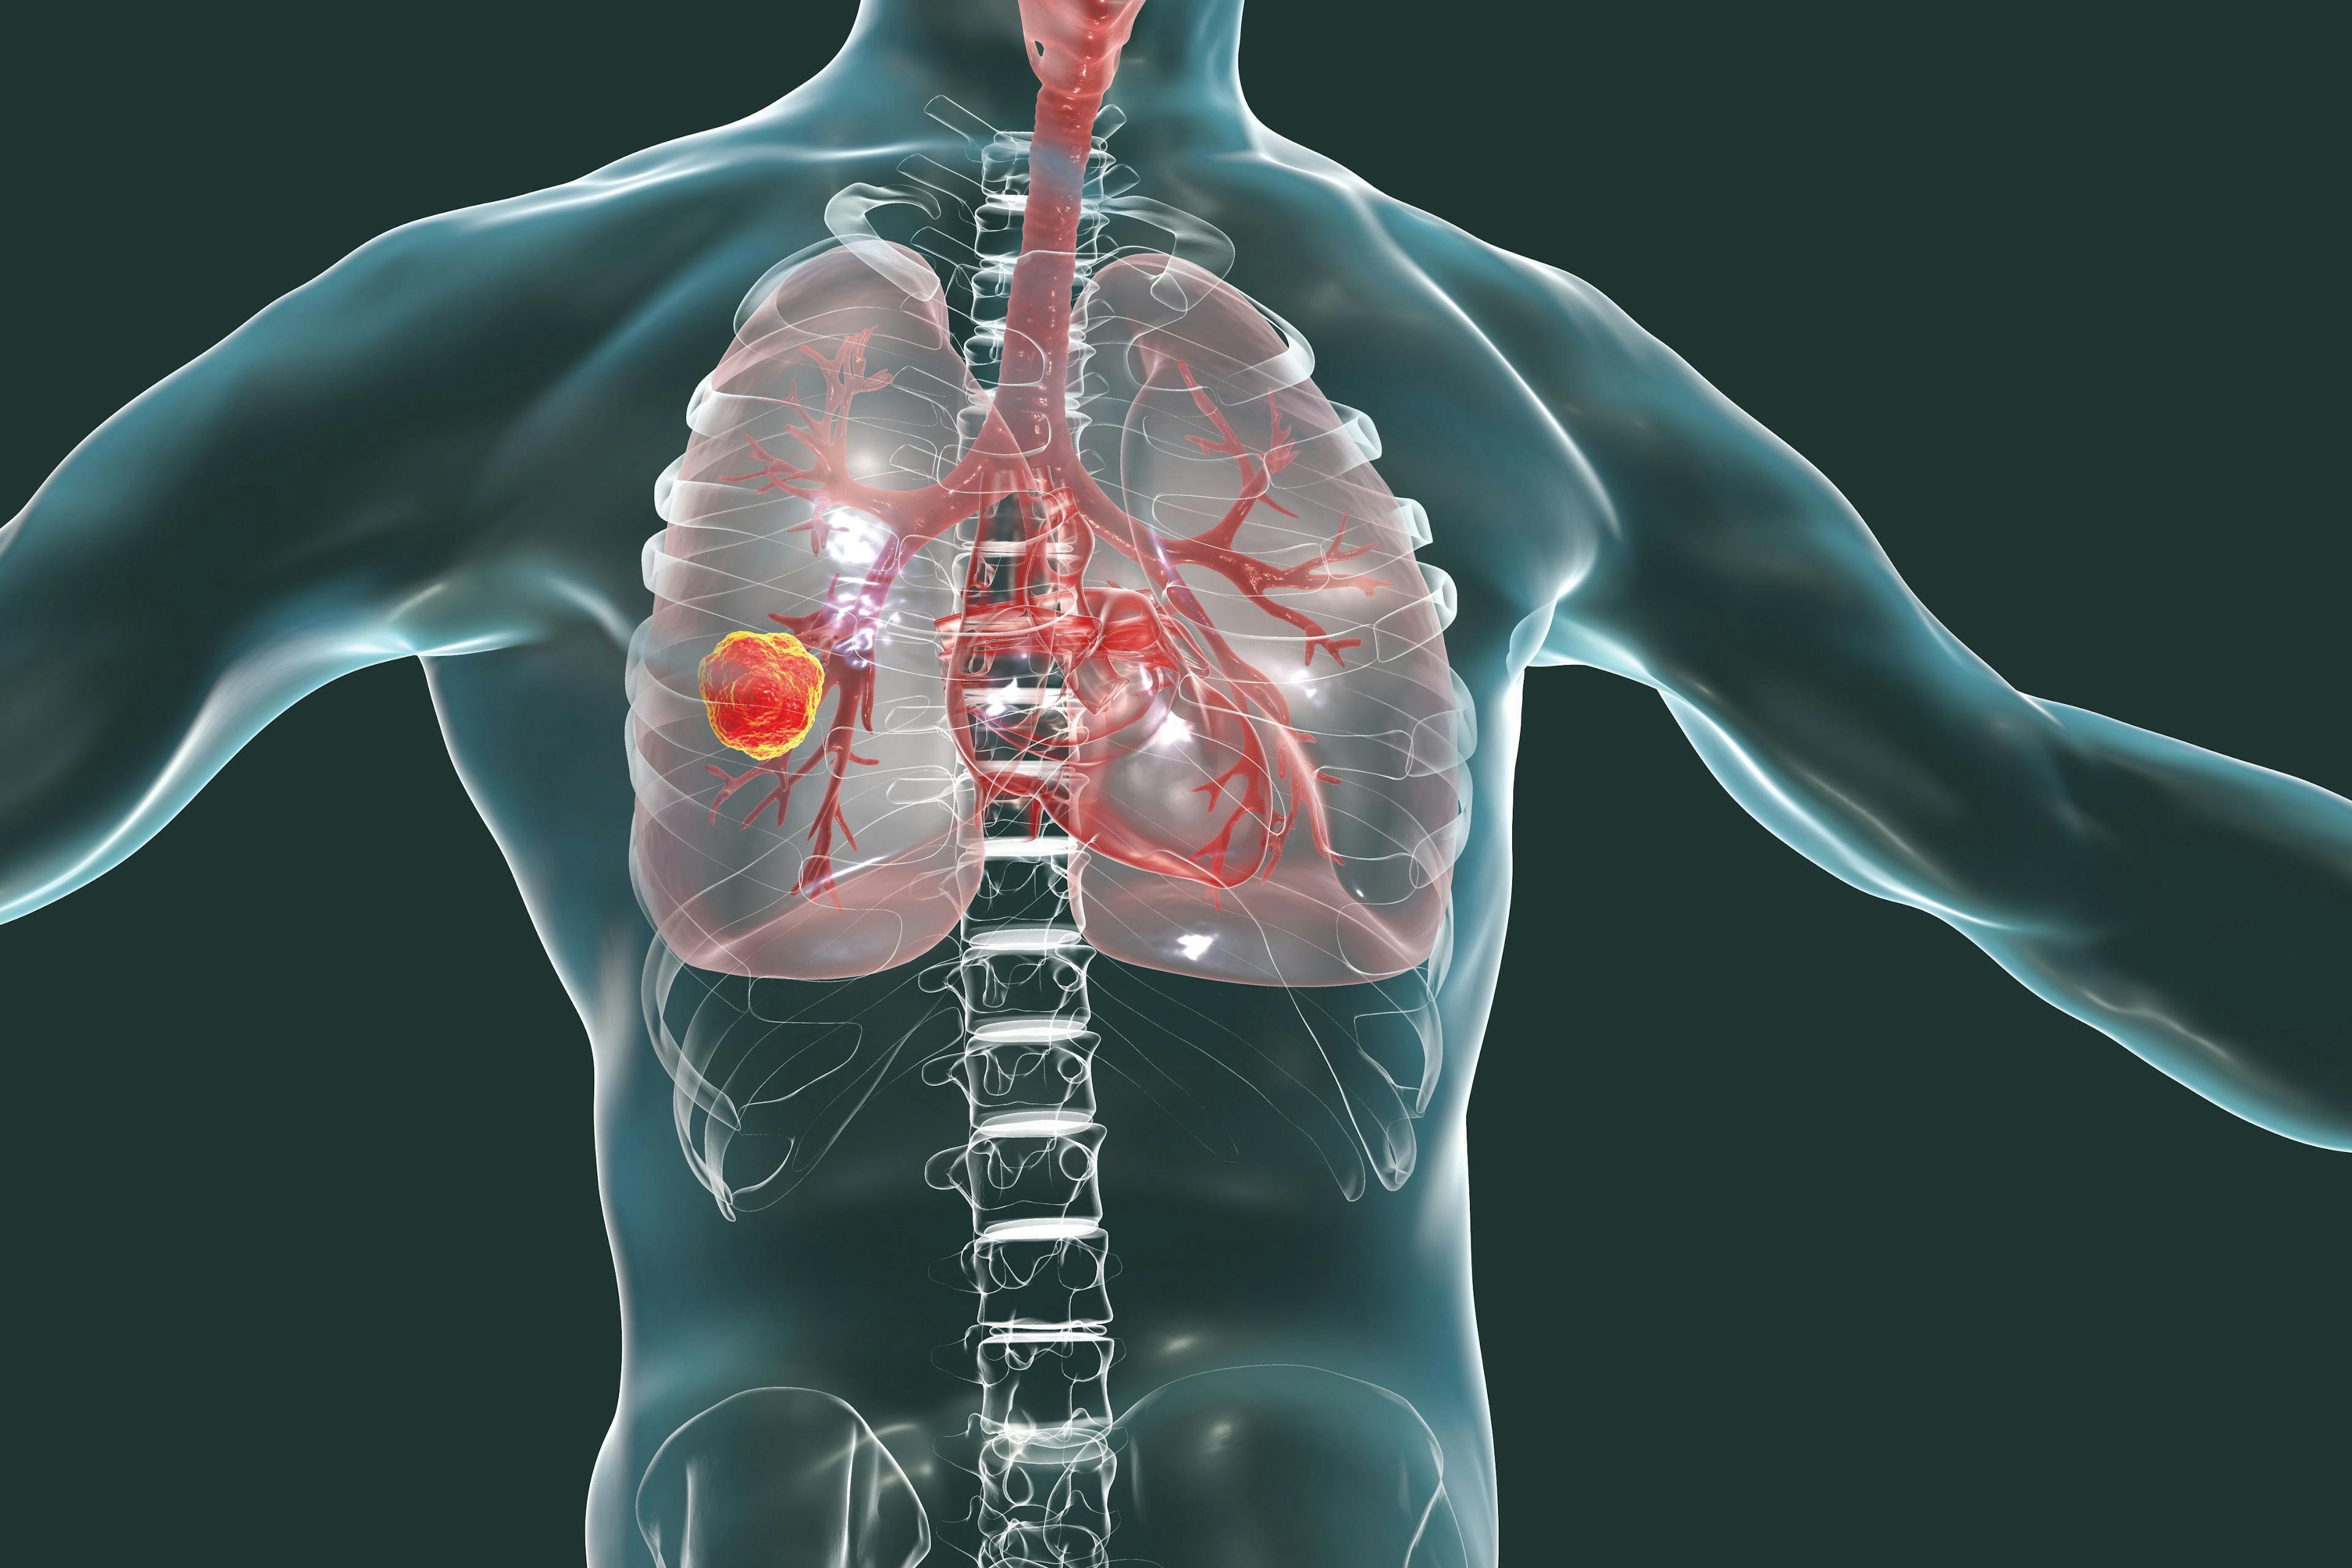 Targeted Therapies for NSCLC May Be Underused in Medicaid Programs, Study Suggests